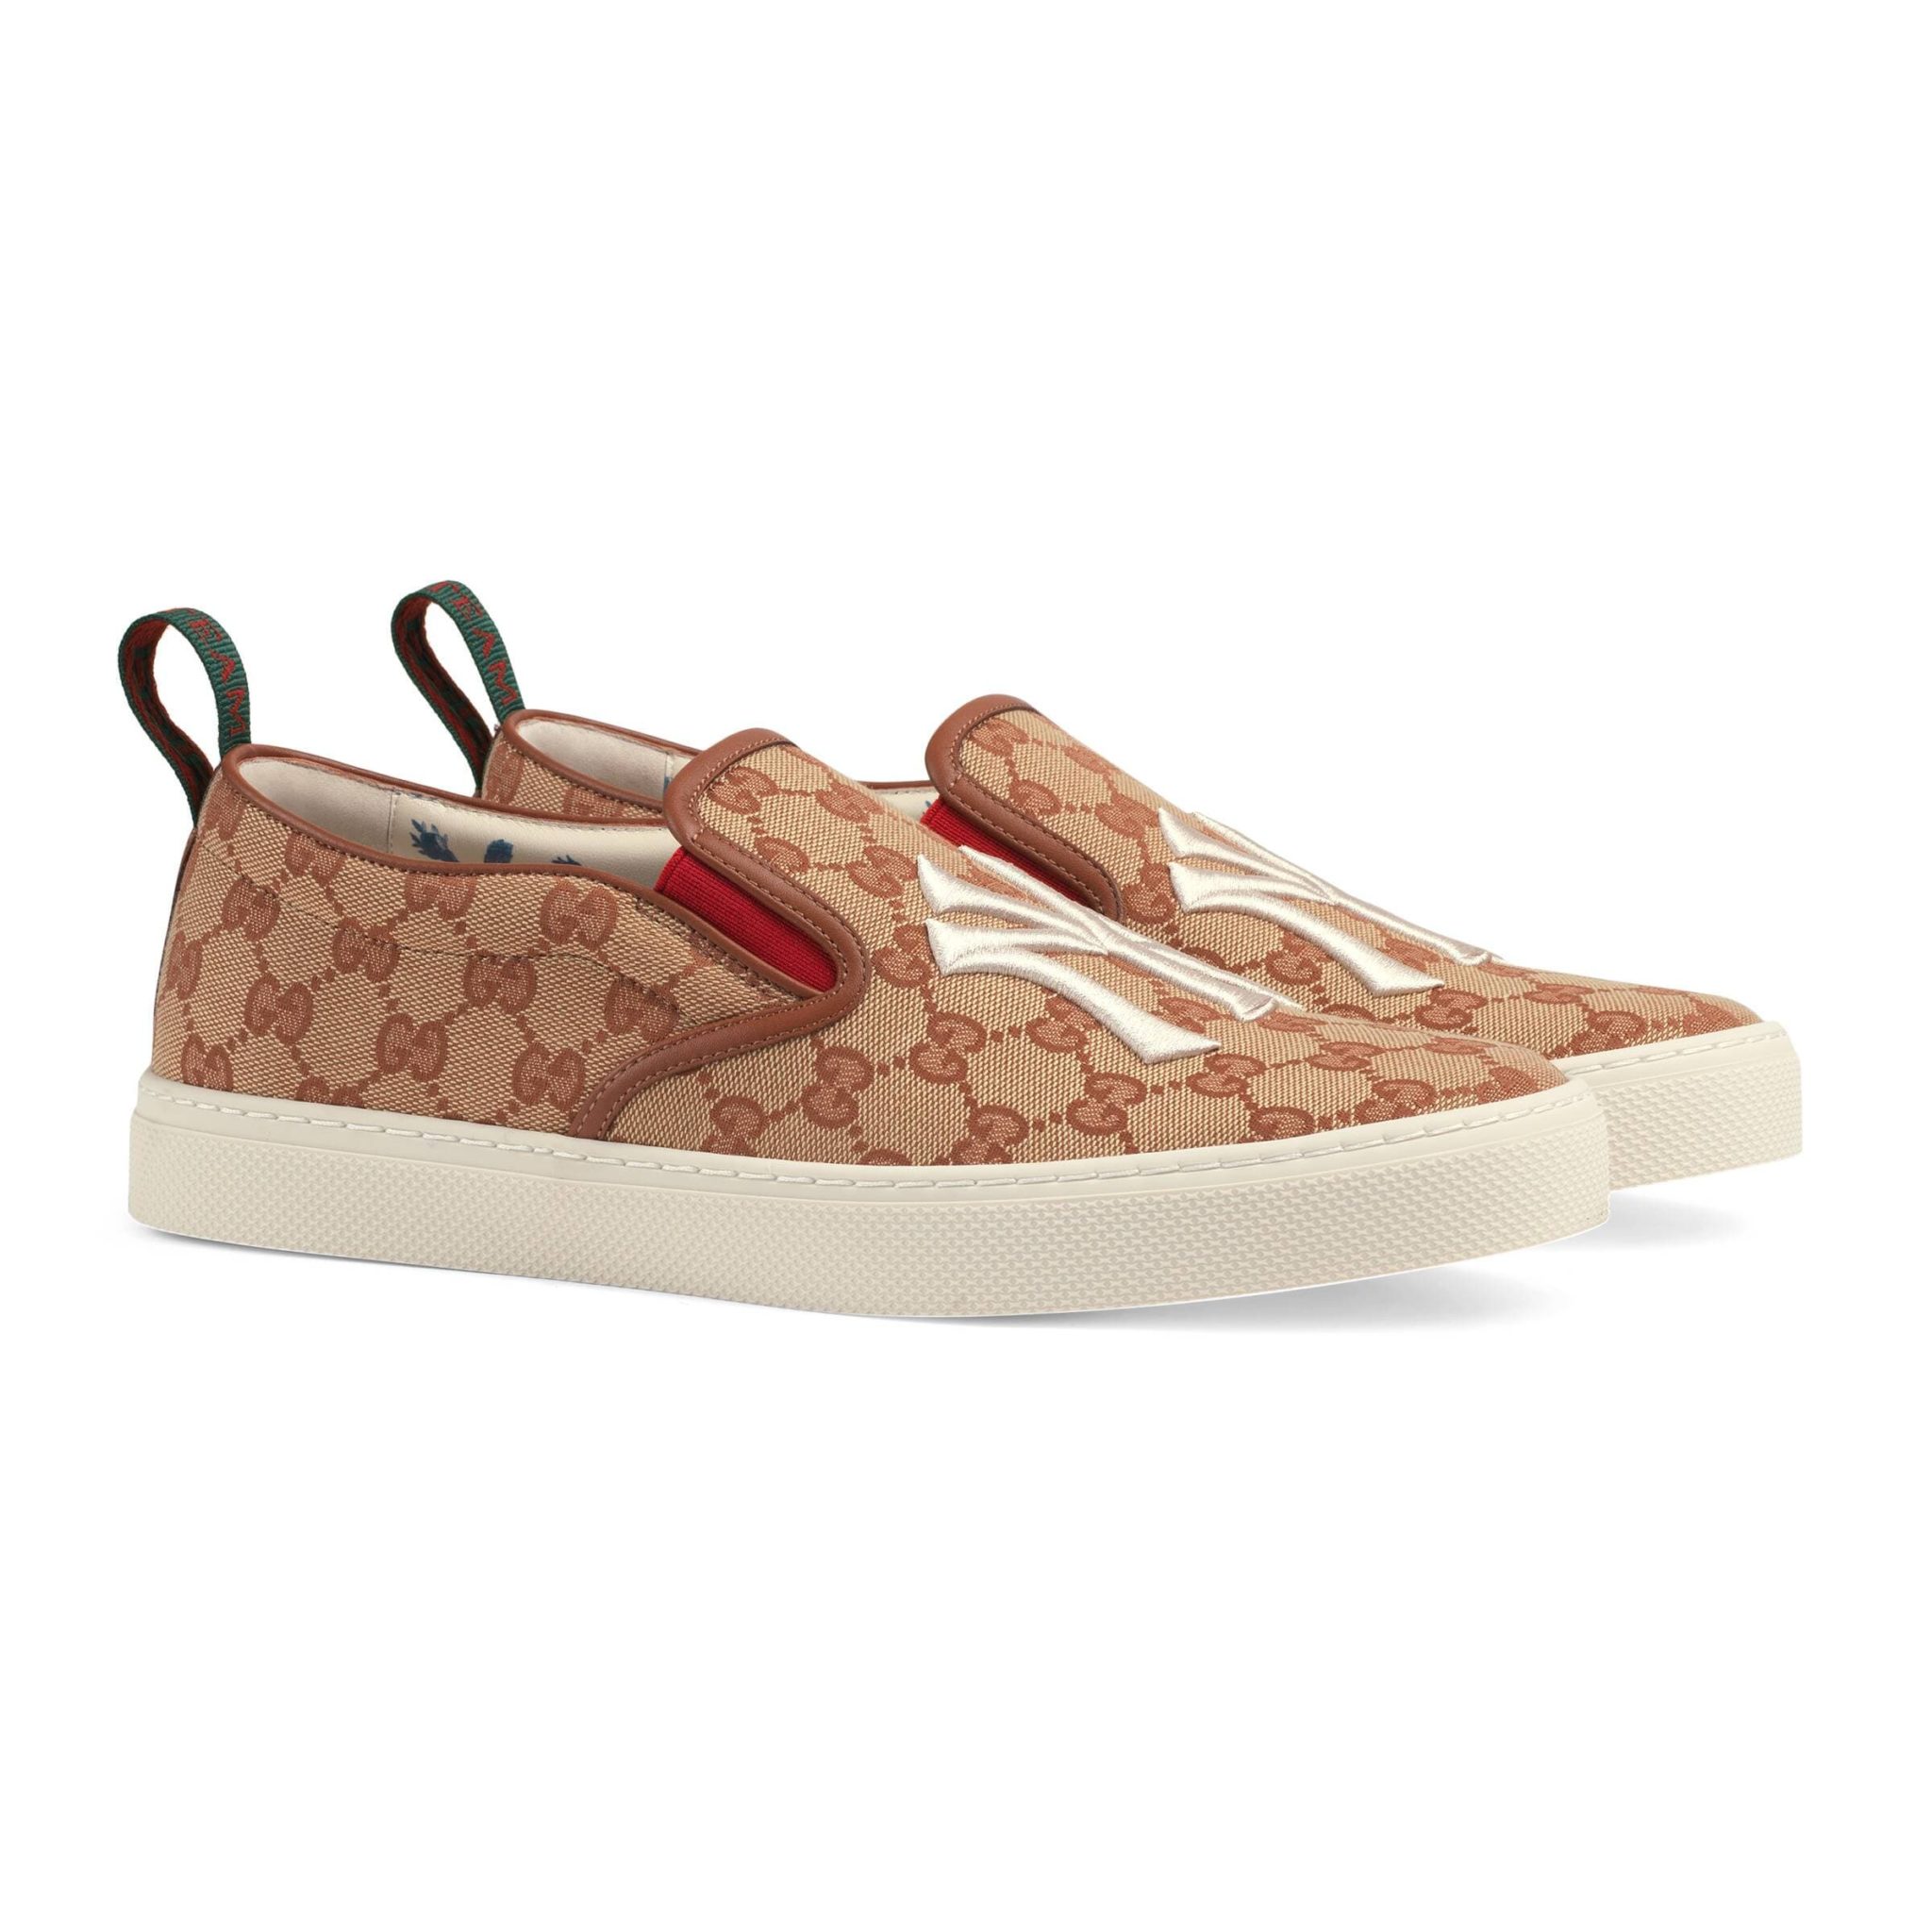 woocommerce-673321-2209615.cloudwaysapps.com-gucci-mens-beige-gg-canvas-ny-yankees-patch-slip-on-sneakers